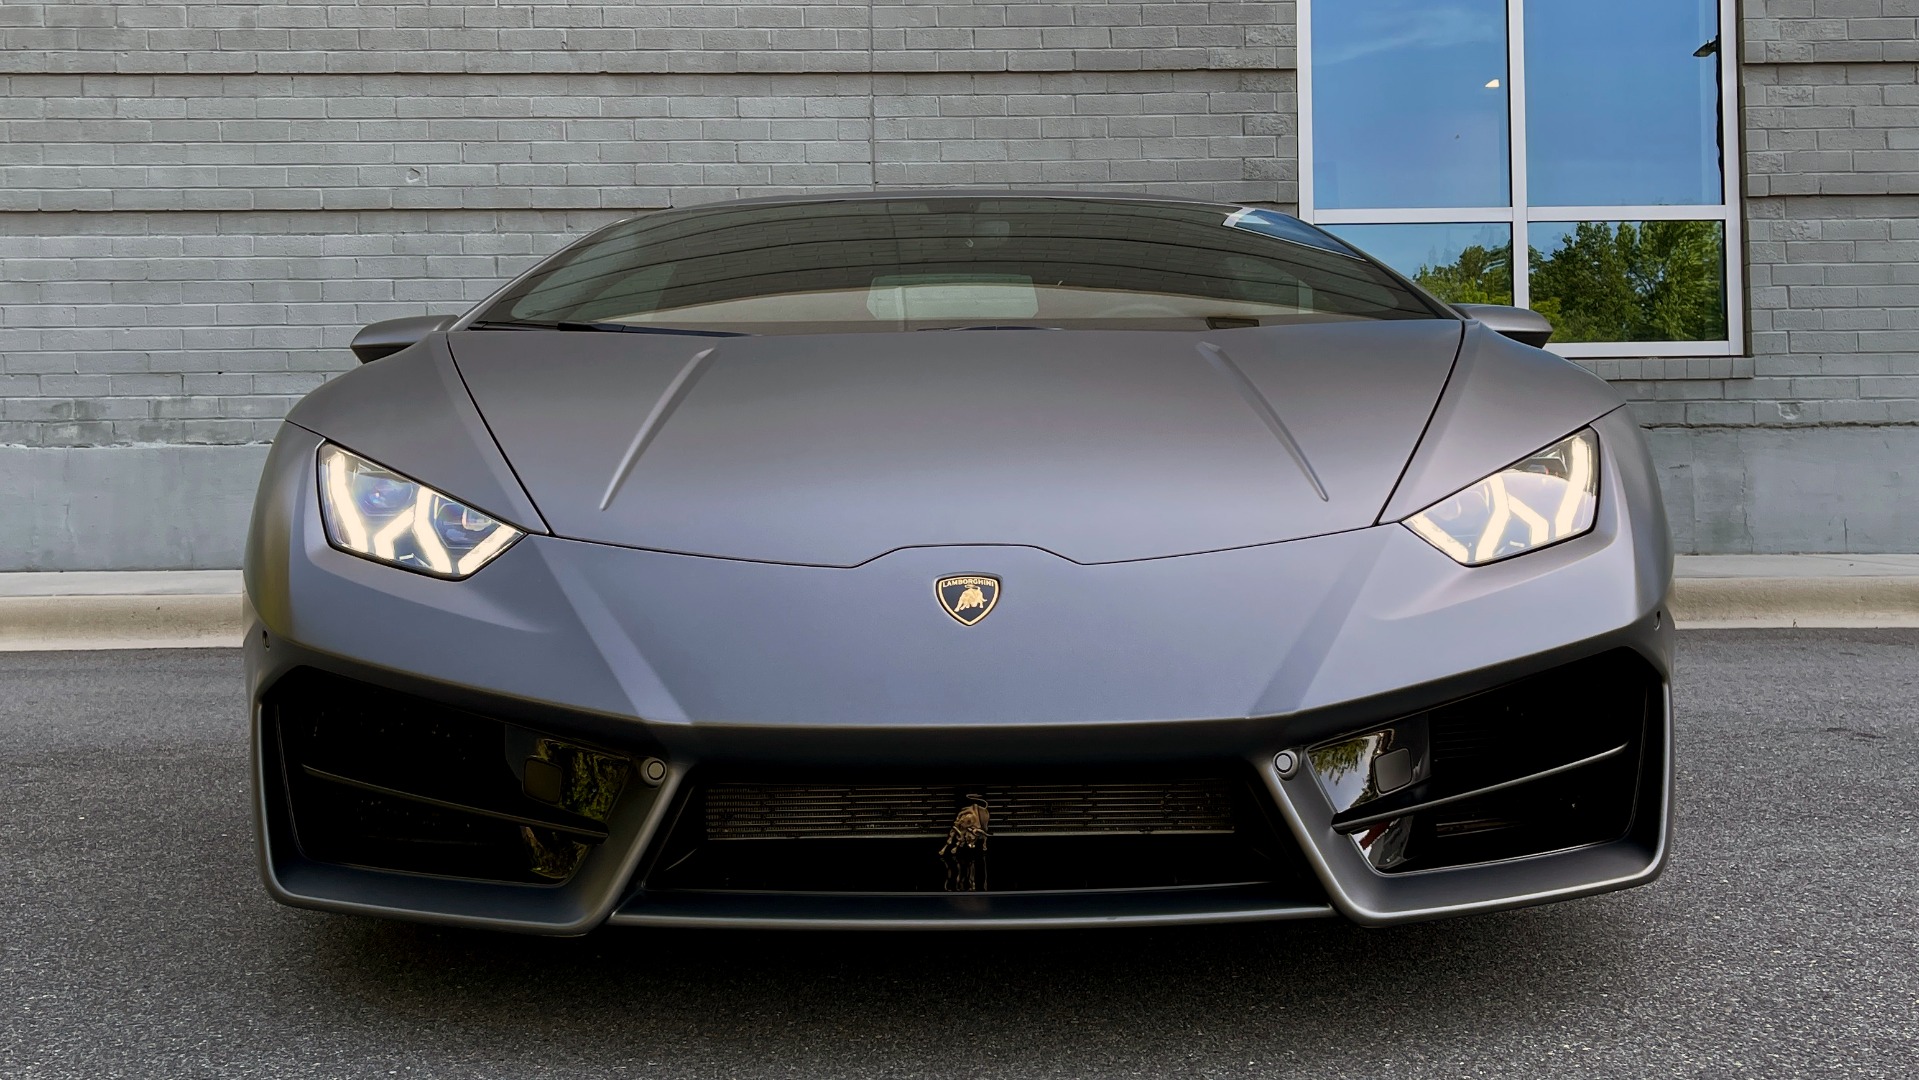 Used 2019 Lamborghini HURACAN LP 580-2 / 5.2L V10 (571HP) / 7-SPD AUTO / RWD / REARVIEW for sale $254,999 at Formula Imports in Charlotte NC 28227 5